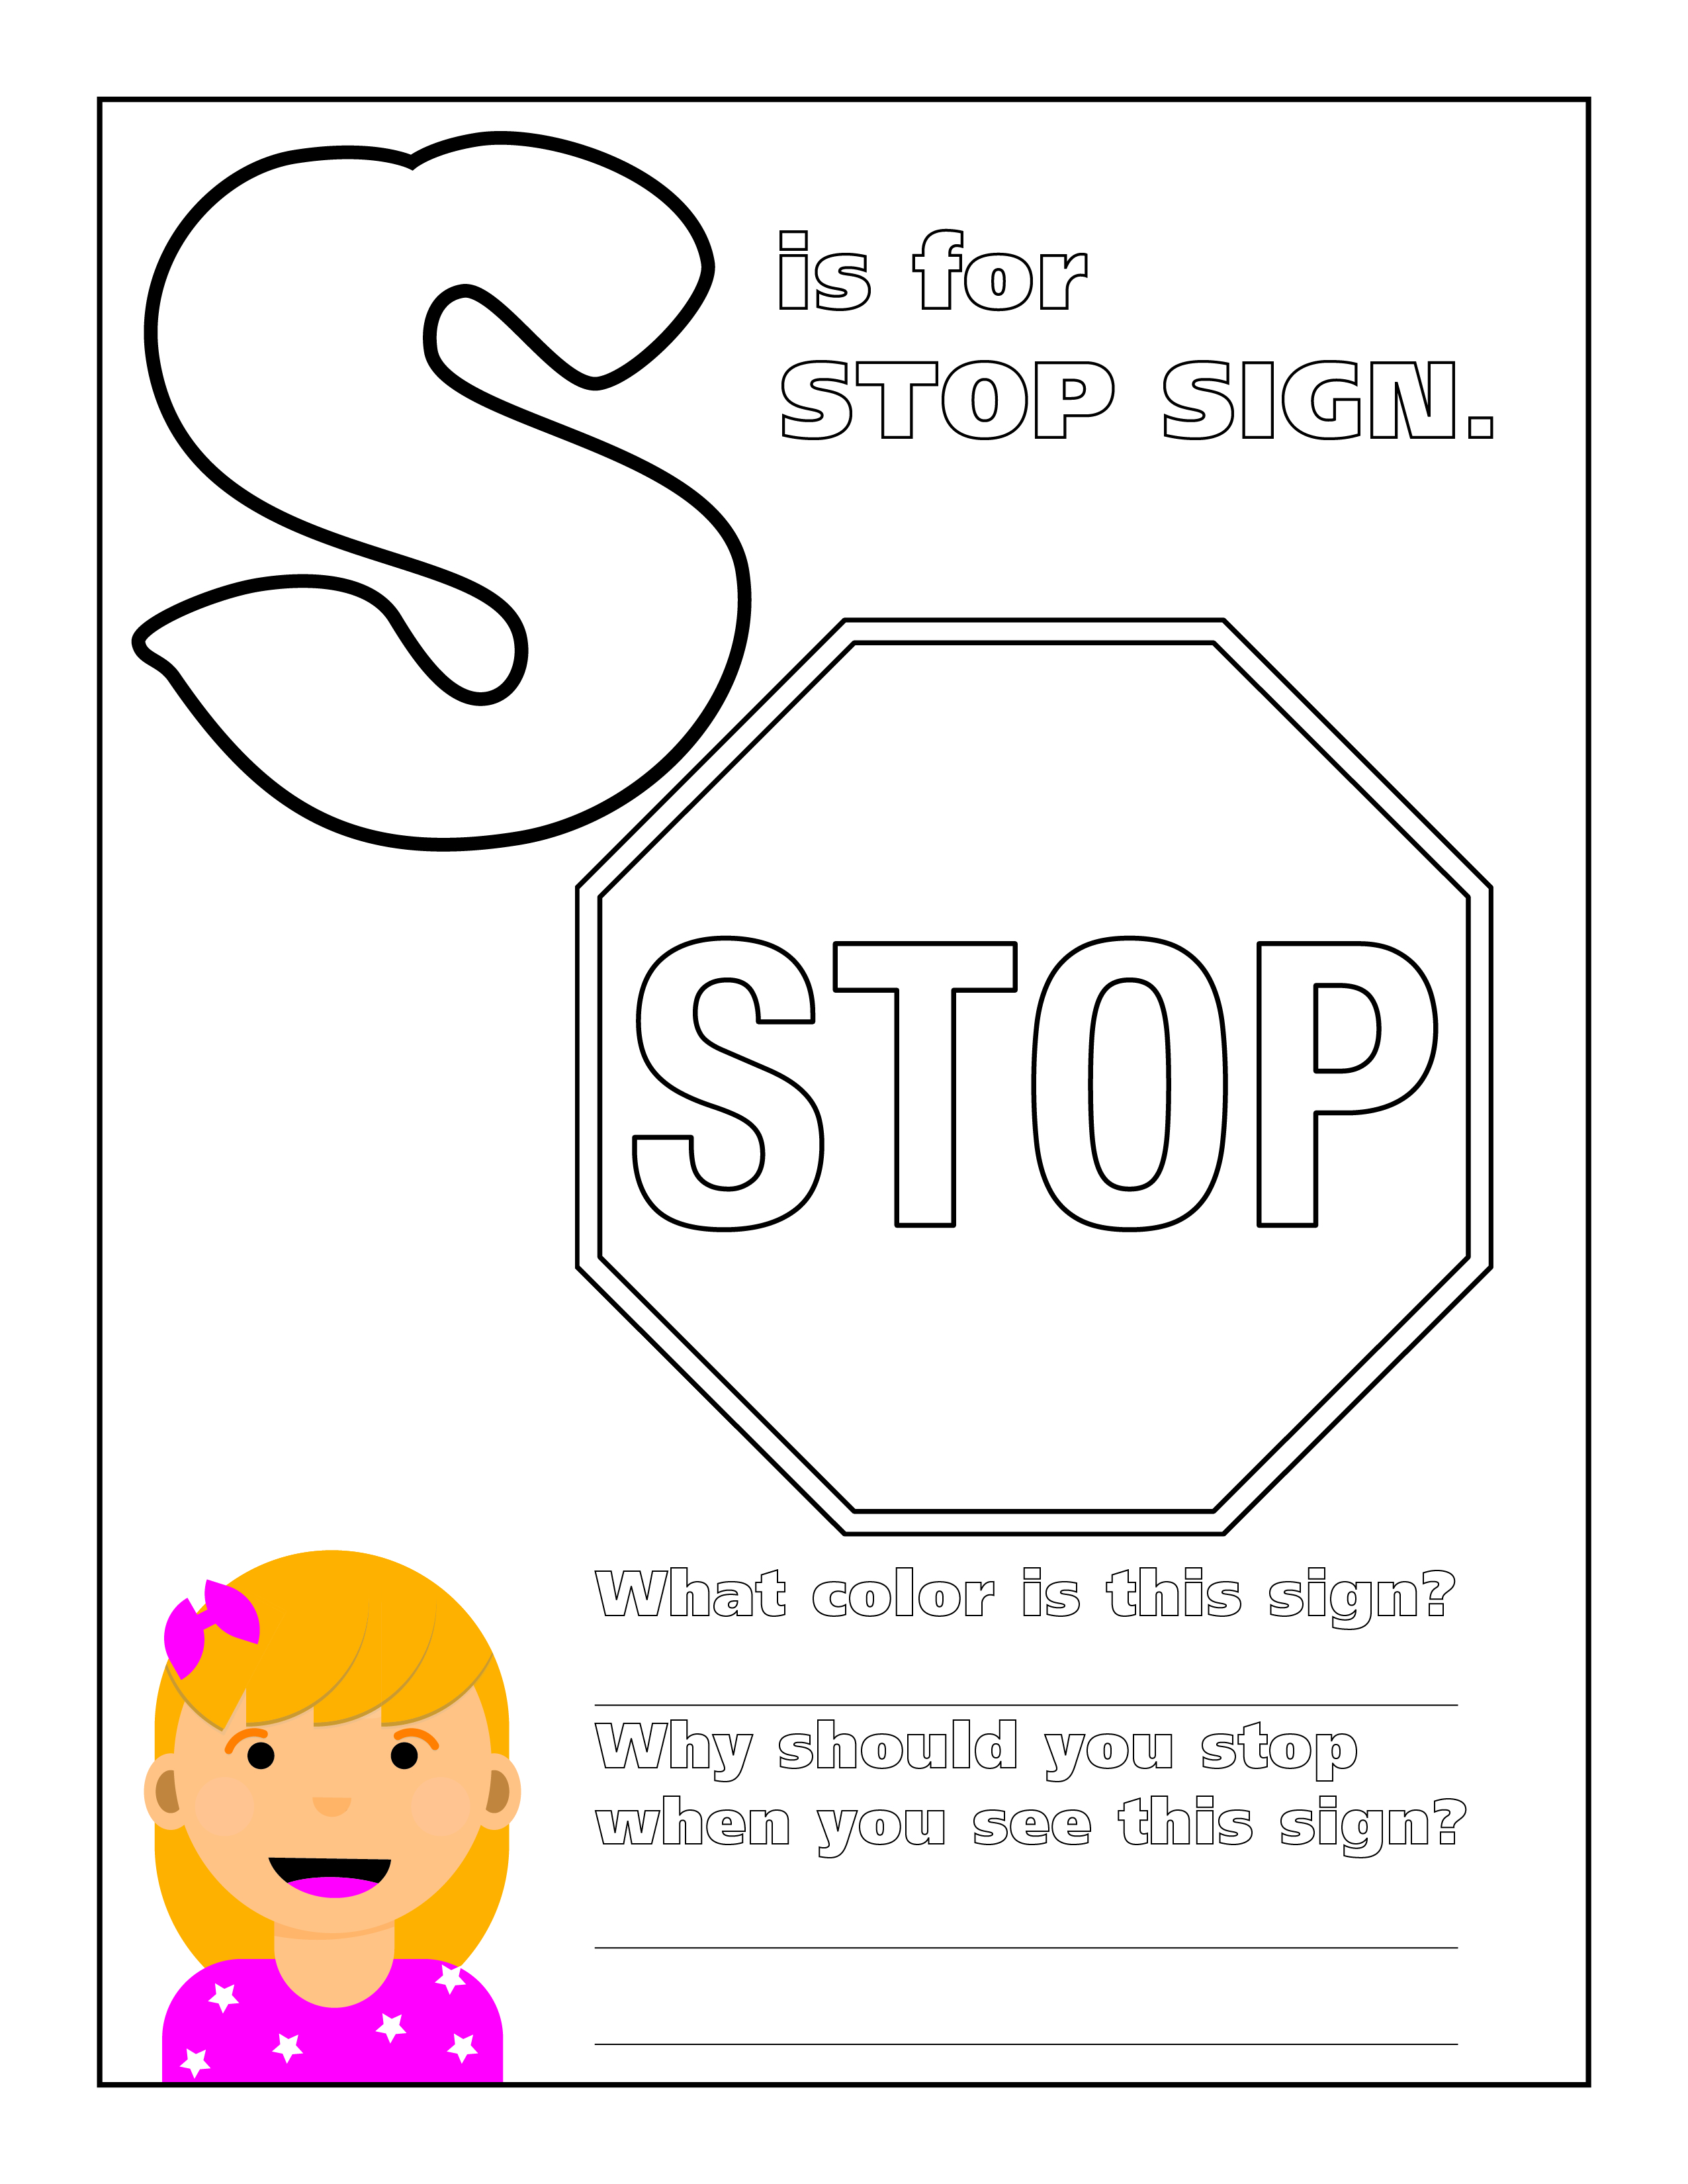 Vdot on x s is for âï sunday ð student activities âï stop sign print our student activities coloring pages word ciphers word searches and more for the kids to enjoy today